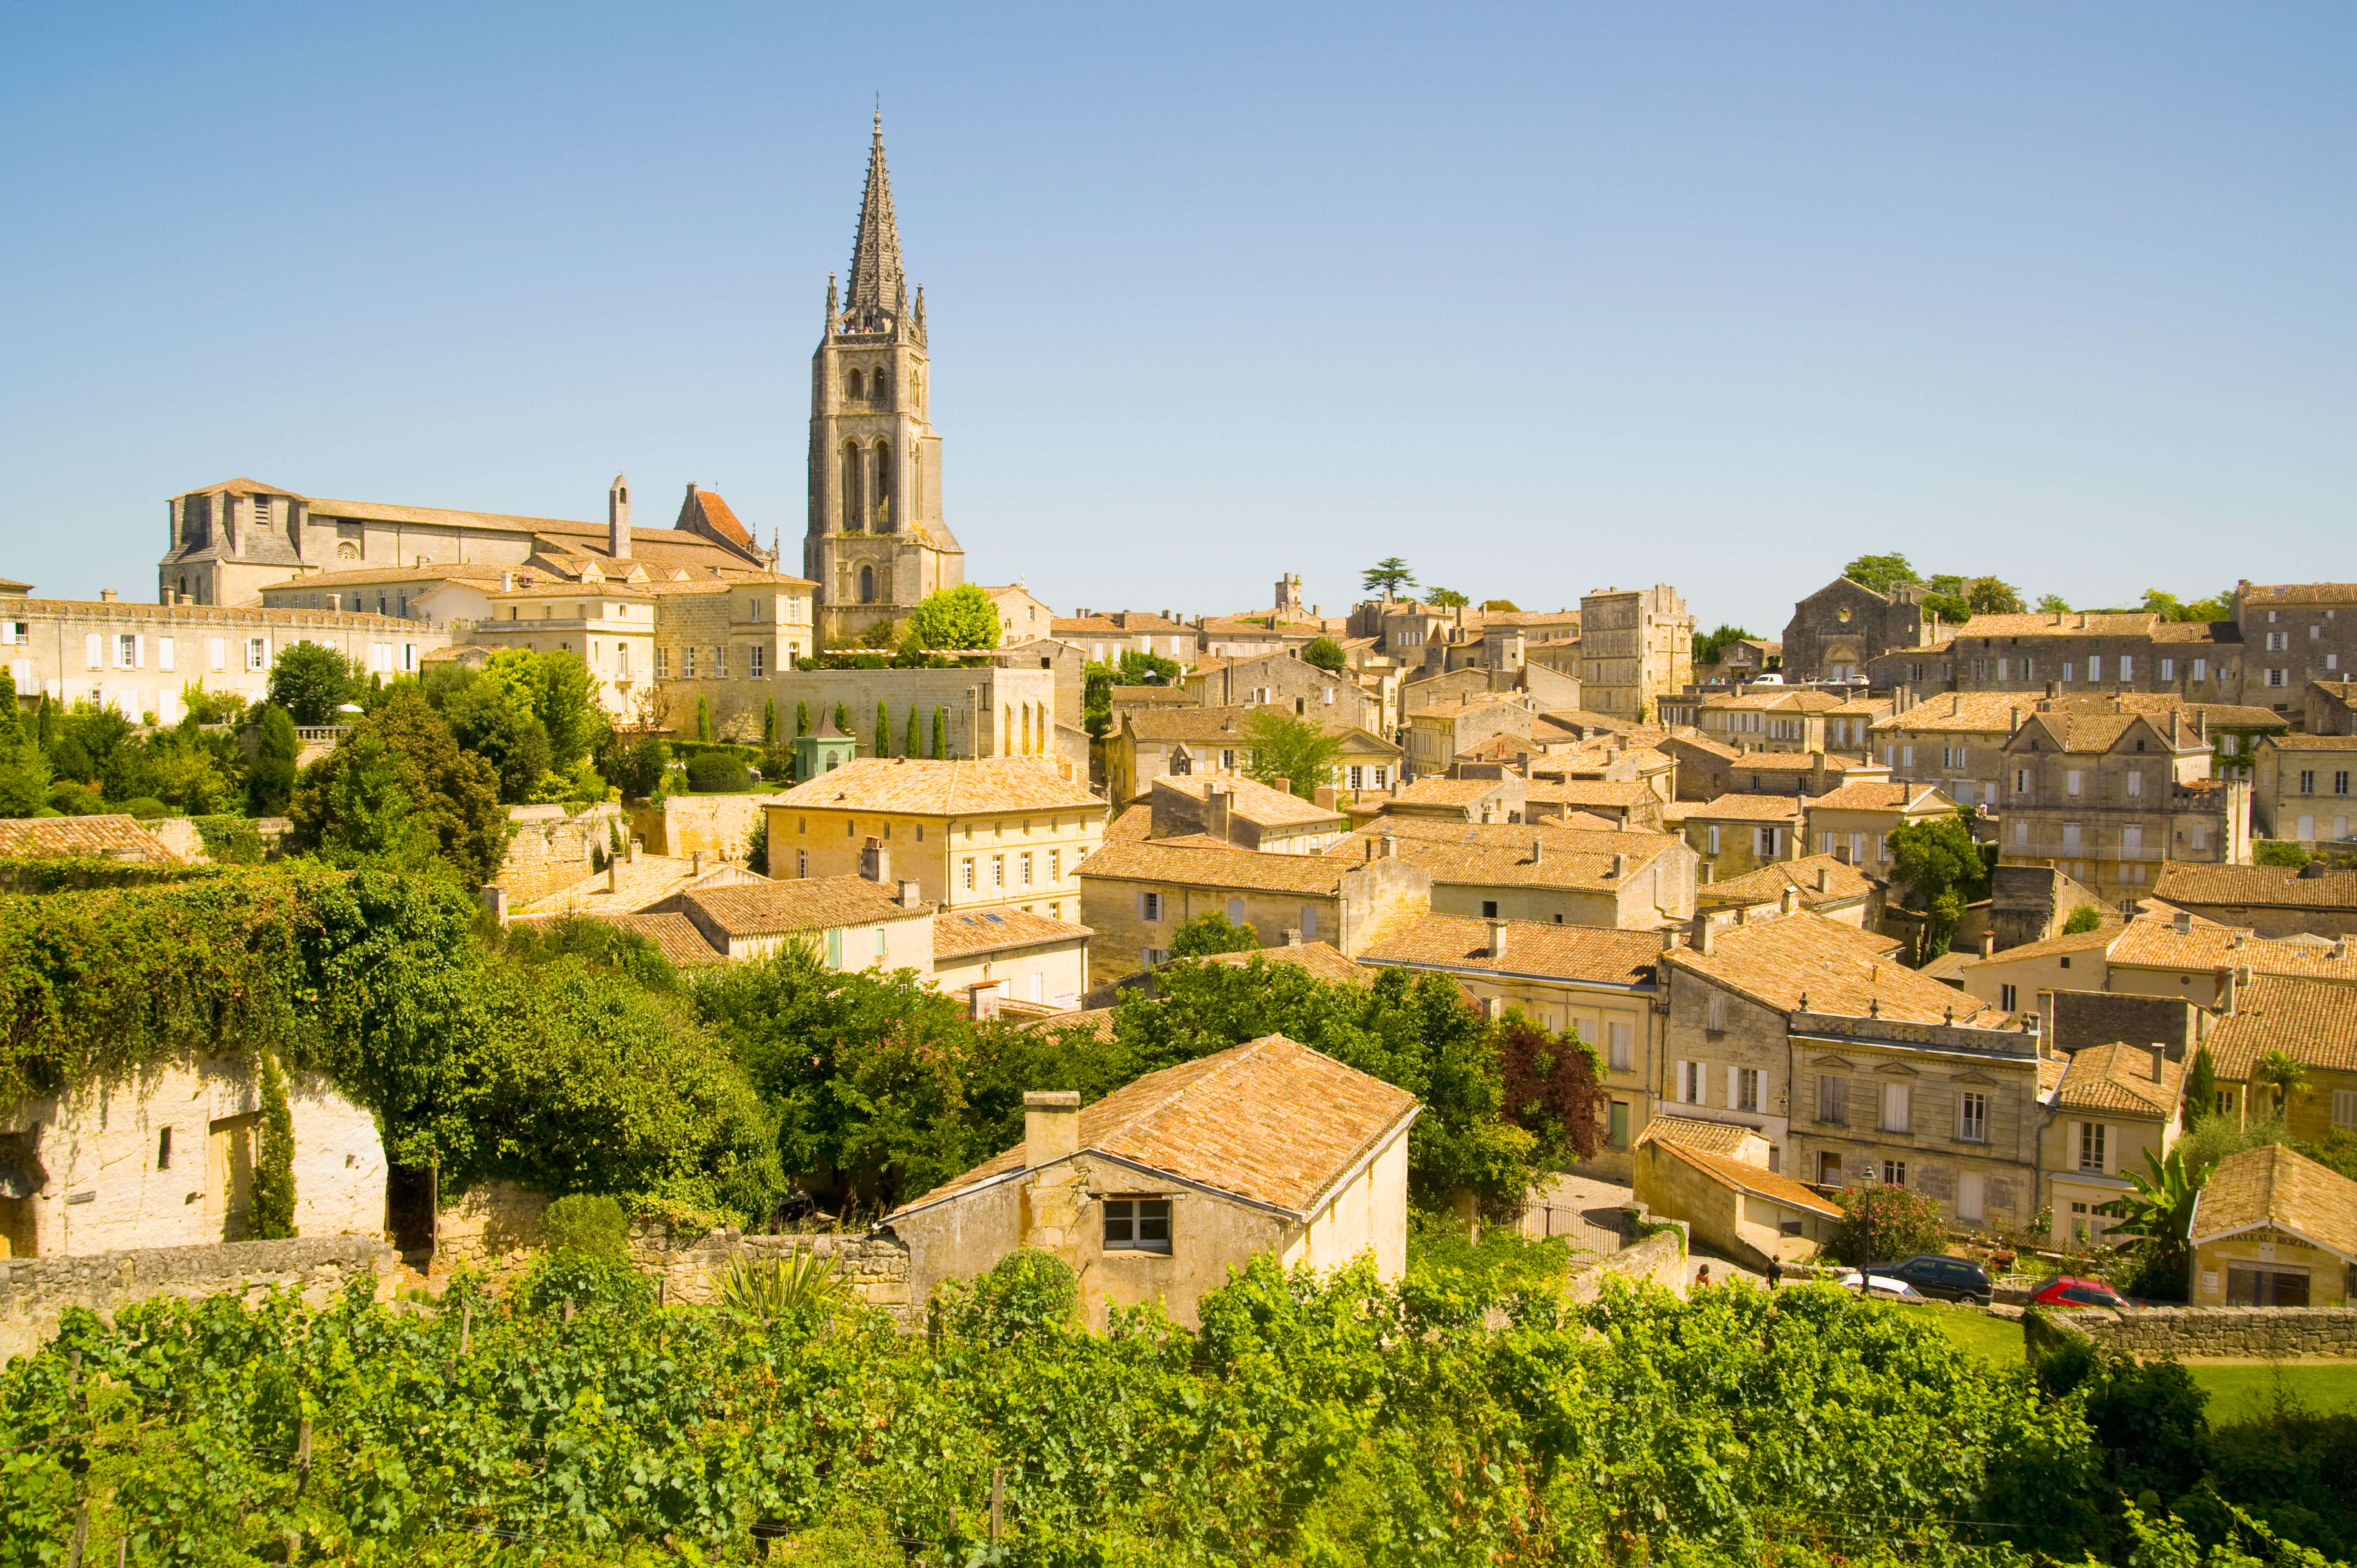 The stylish city of Bordeaux is at its best in the month of June